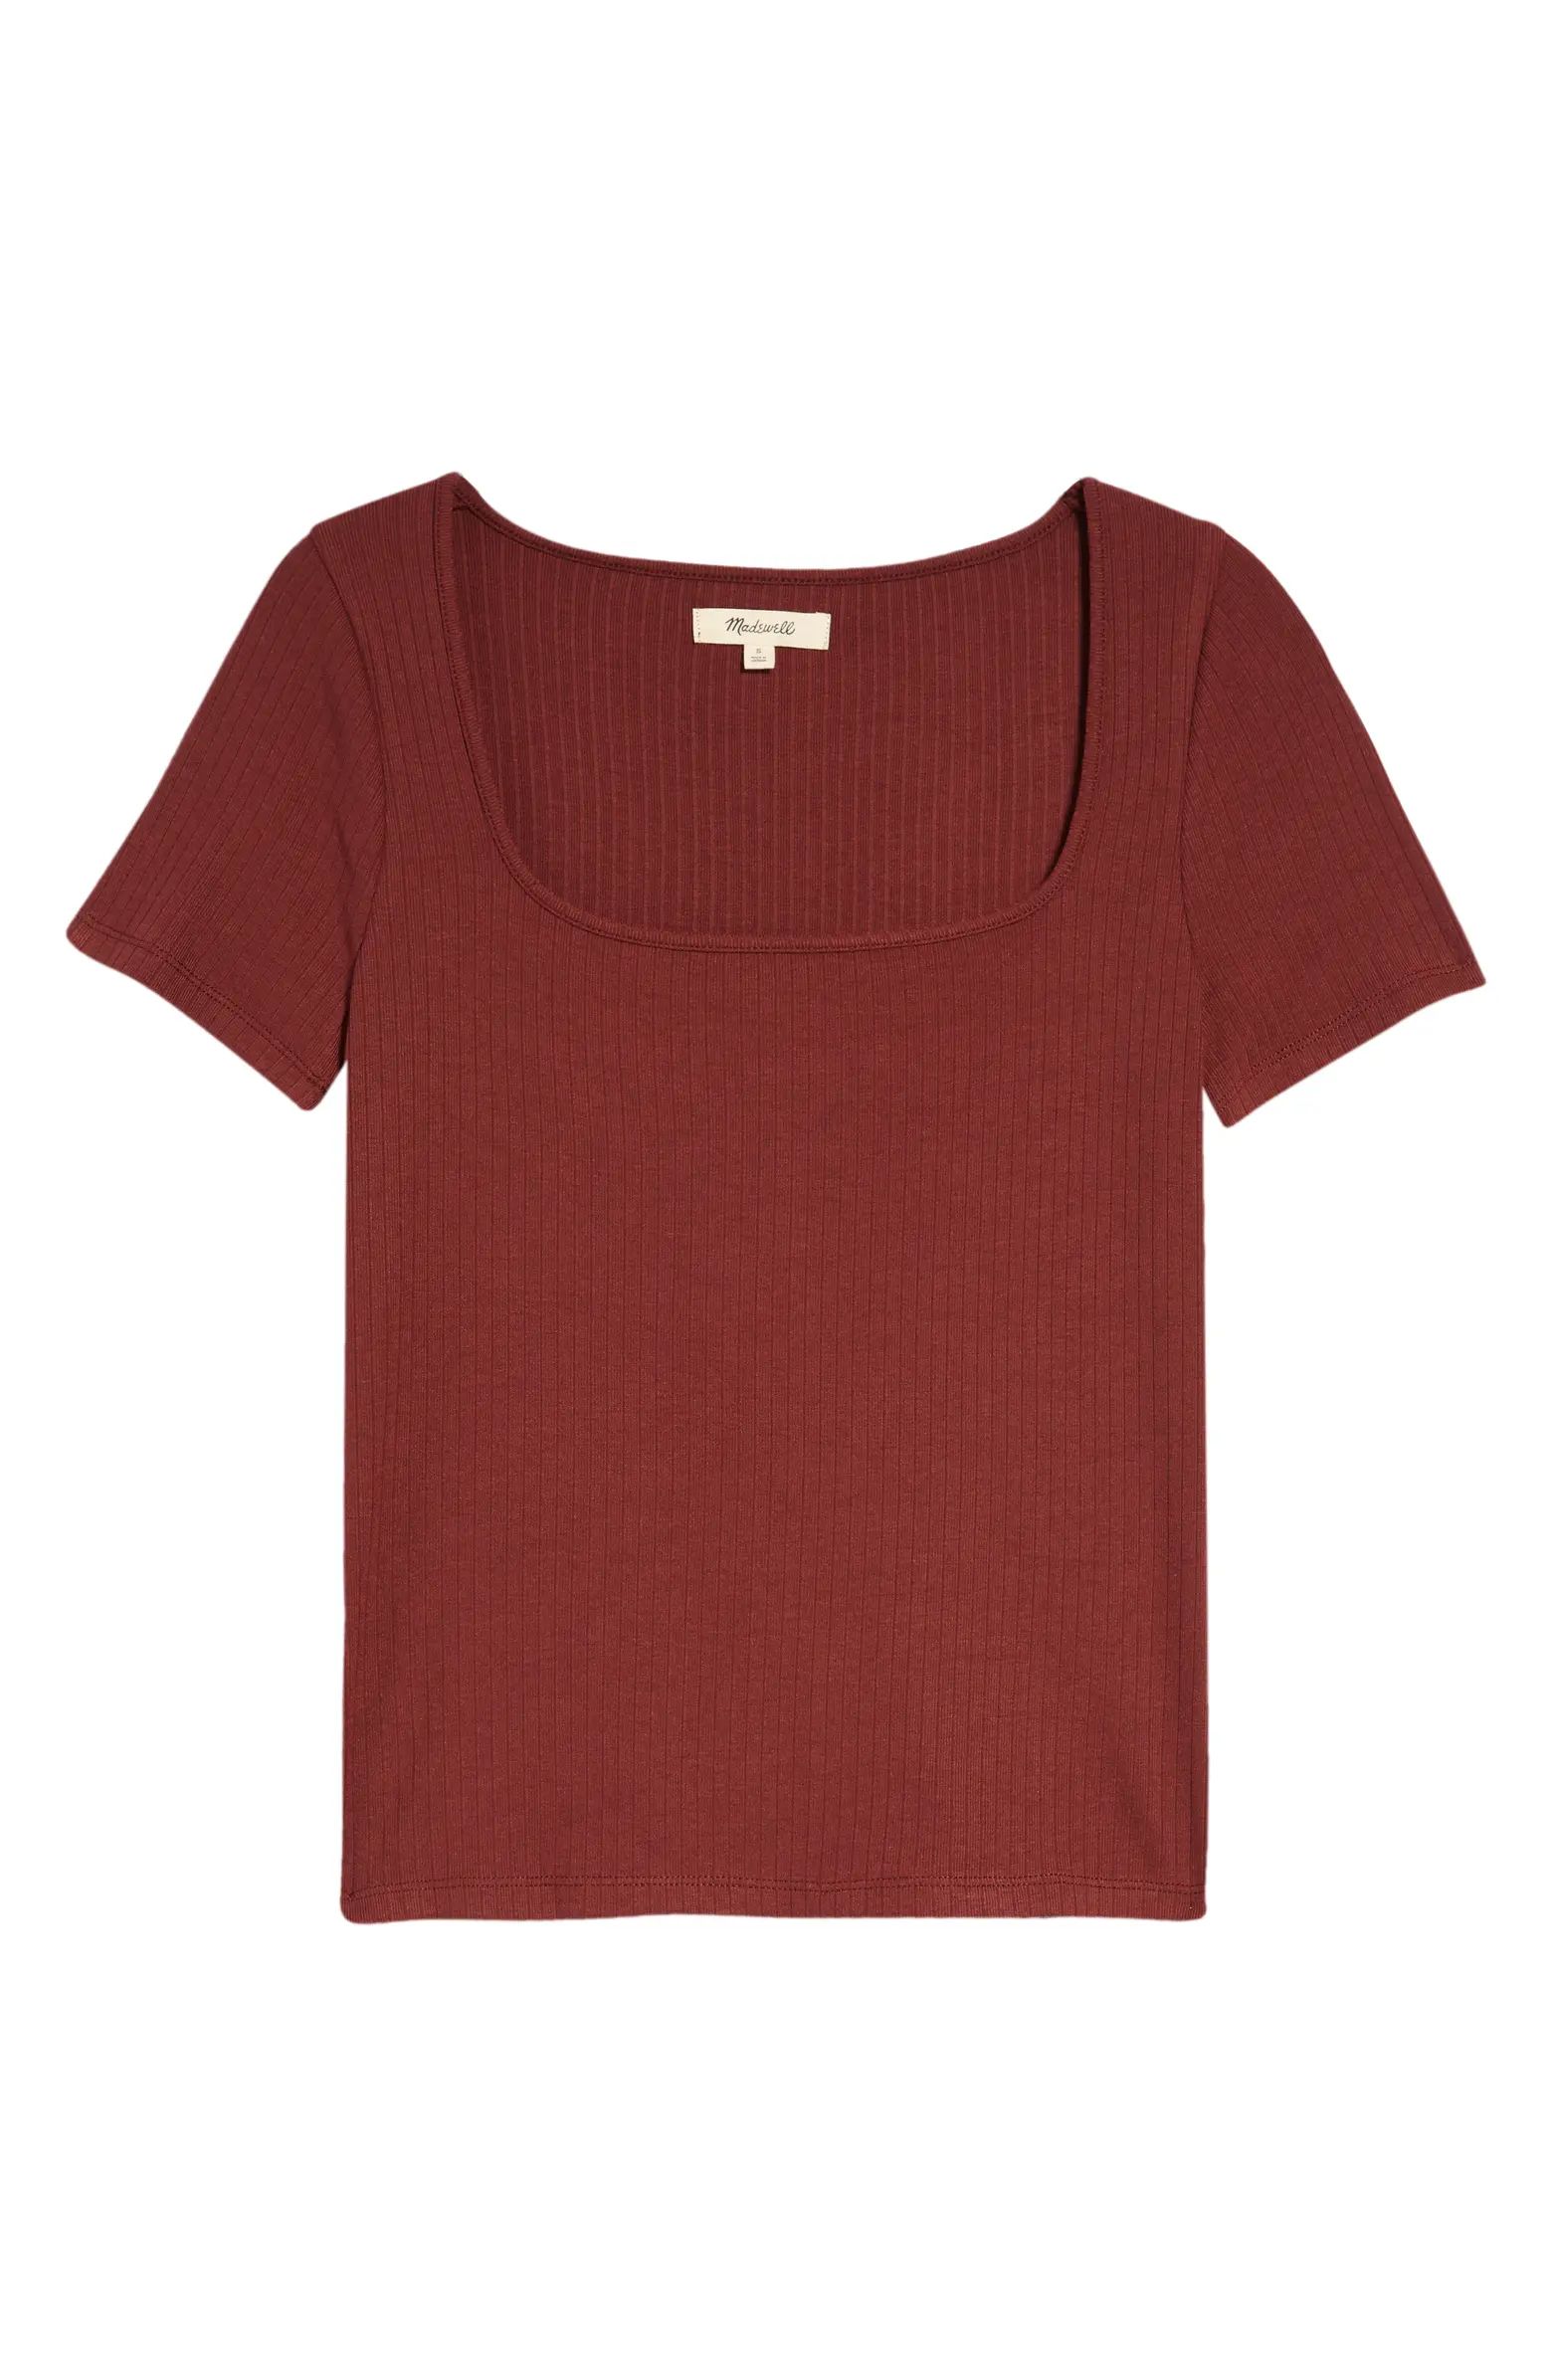 Madewell Rib Square Neck Crop Top | Nordstrom | Nordstrom